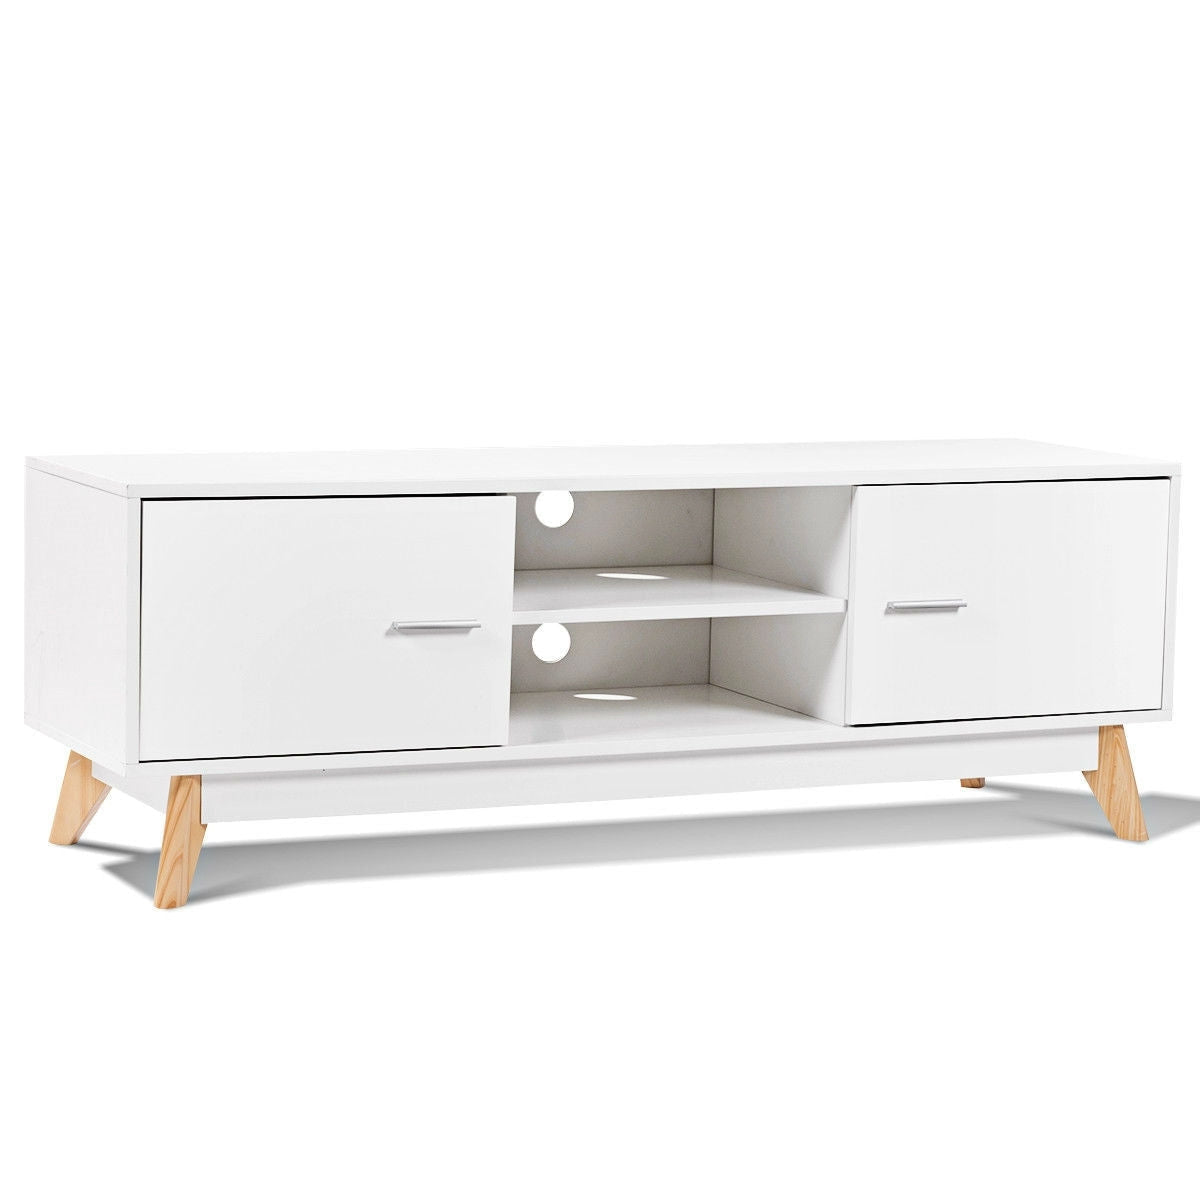 Living Room > TV Stands And Entertainment Centers - Modern Mid-Century Style Entertainment Center TV Stand In White Wood Finish